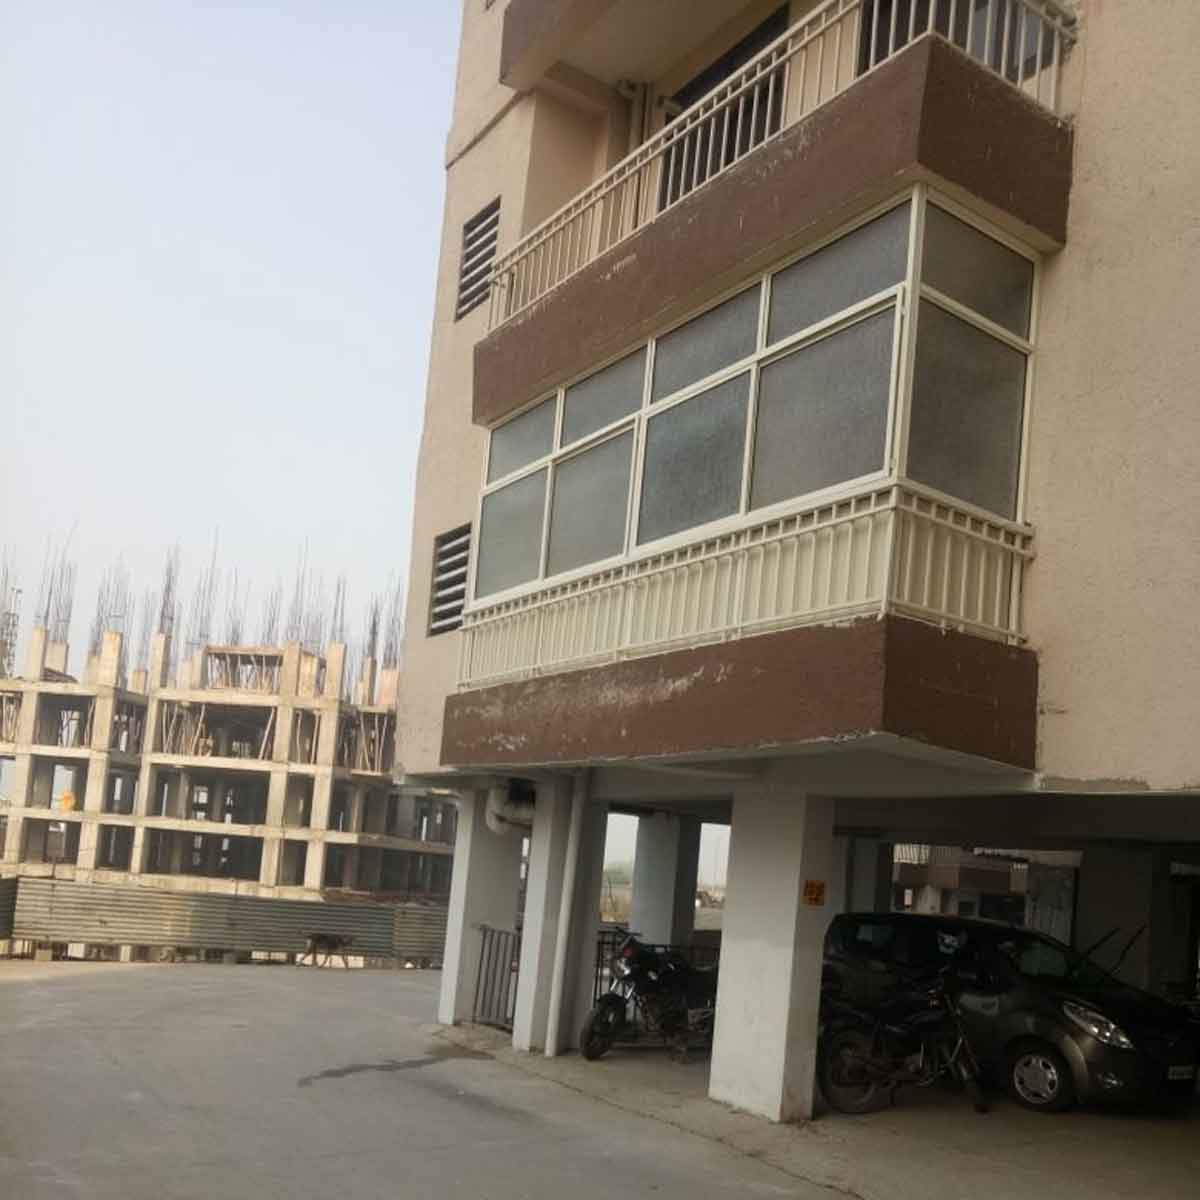 UPVC Aluminium Balcony Covering Manufacturers, Suppliers in Rajsamand